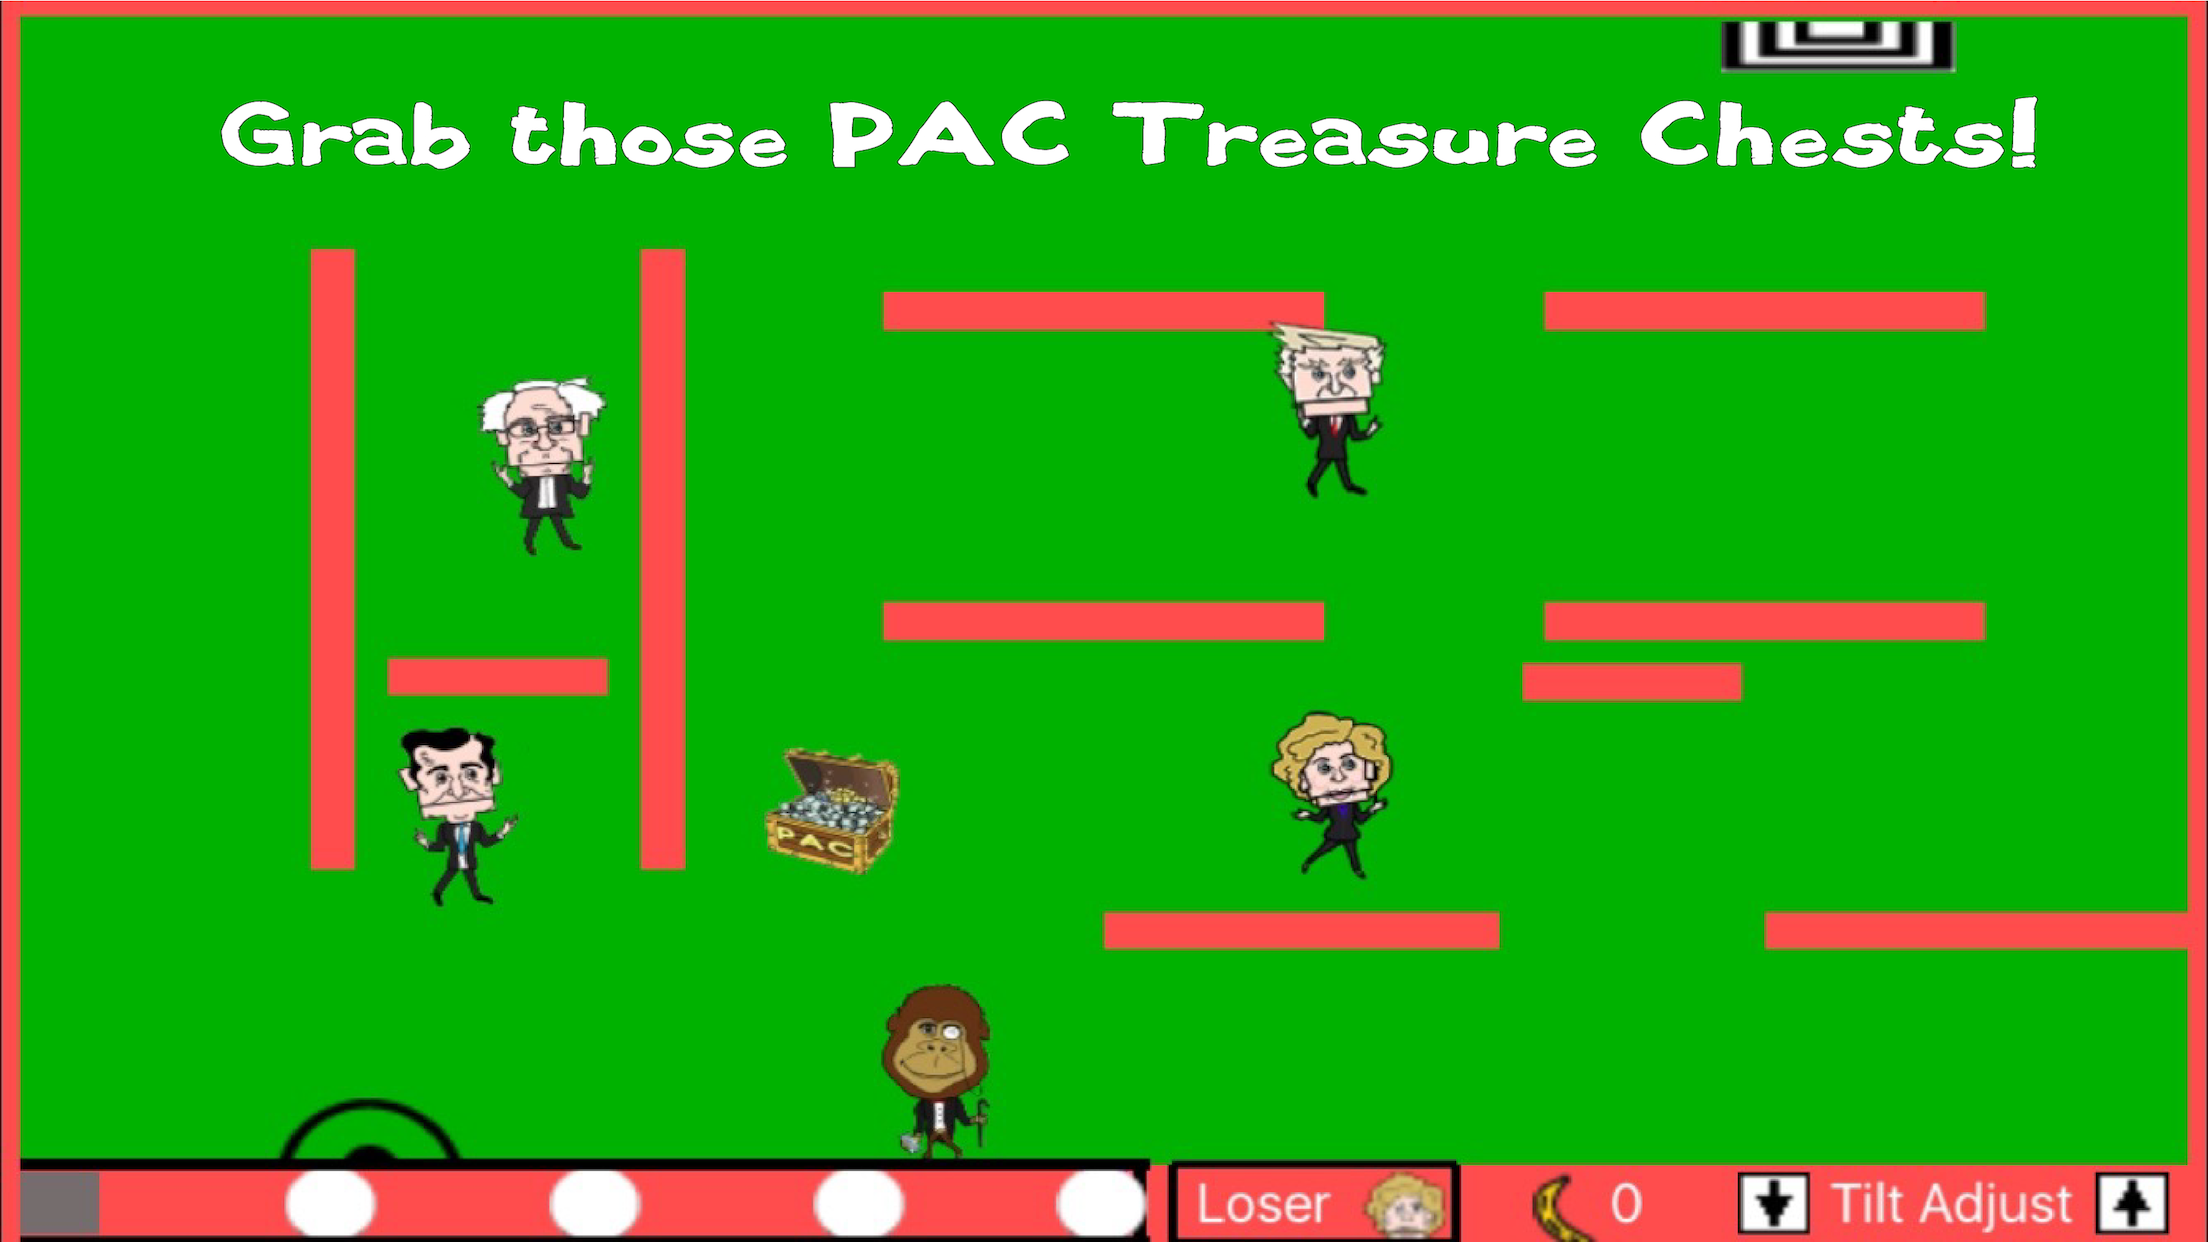 Race politicians to PAC treasure chests